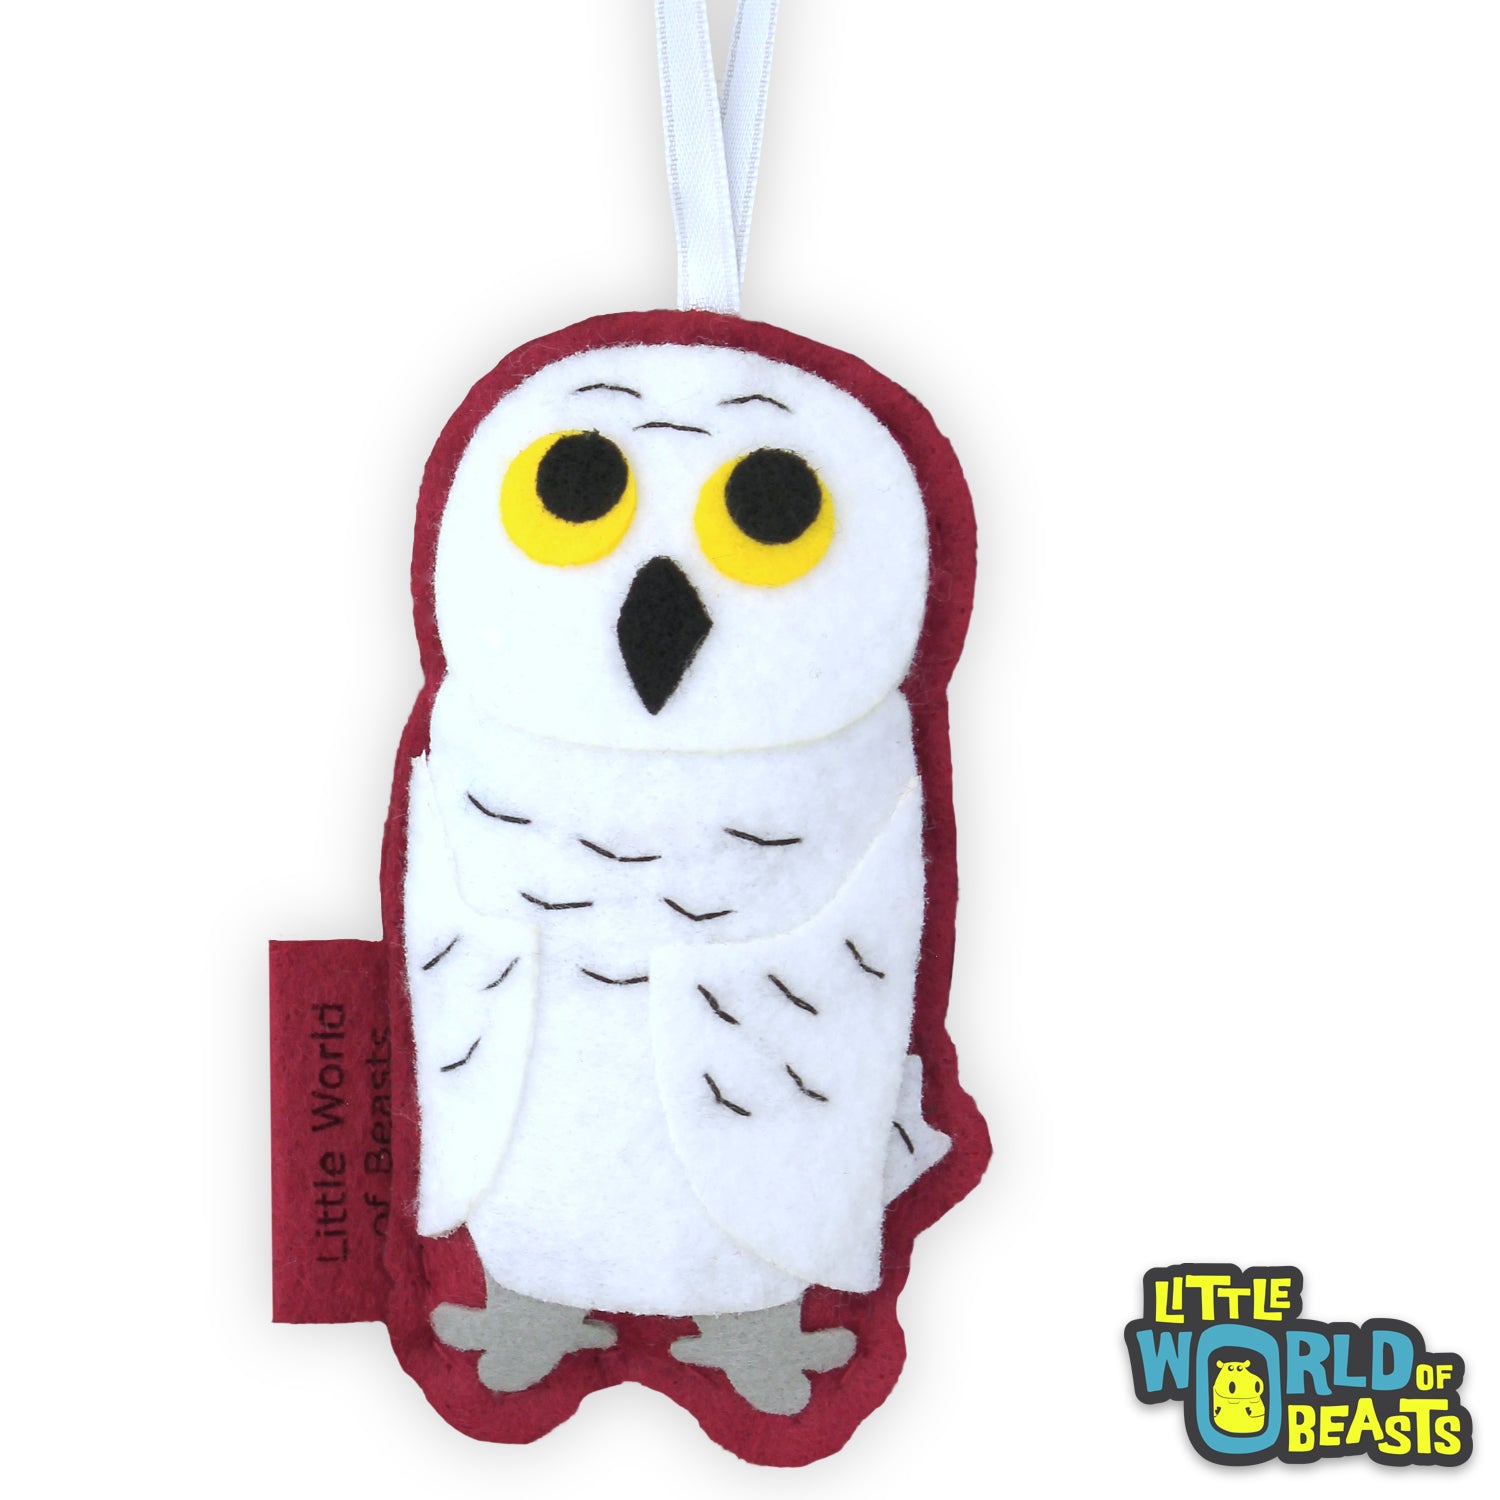 Felt Snowy Owl Ornament with Personalized Back